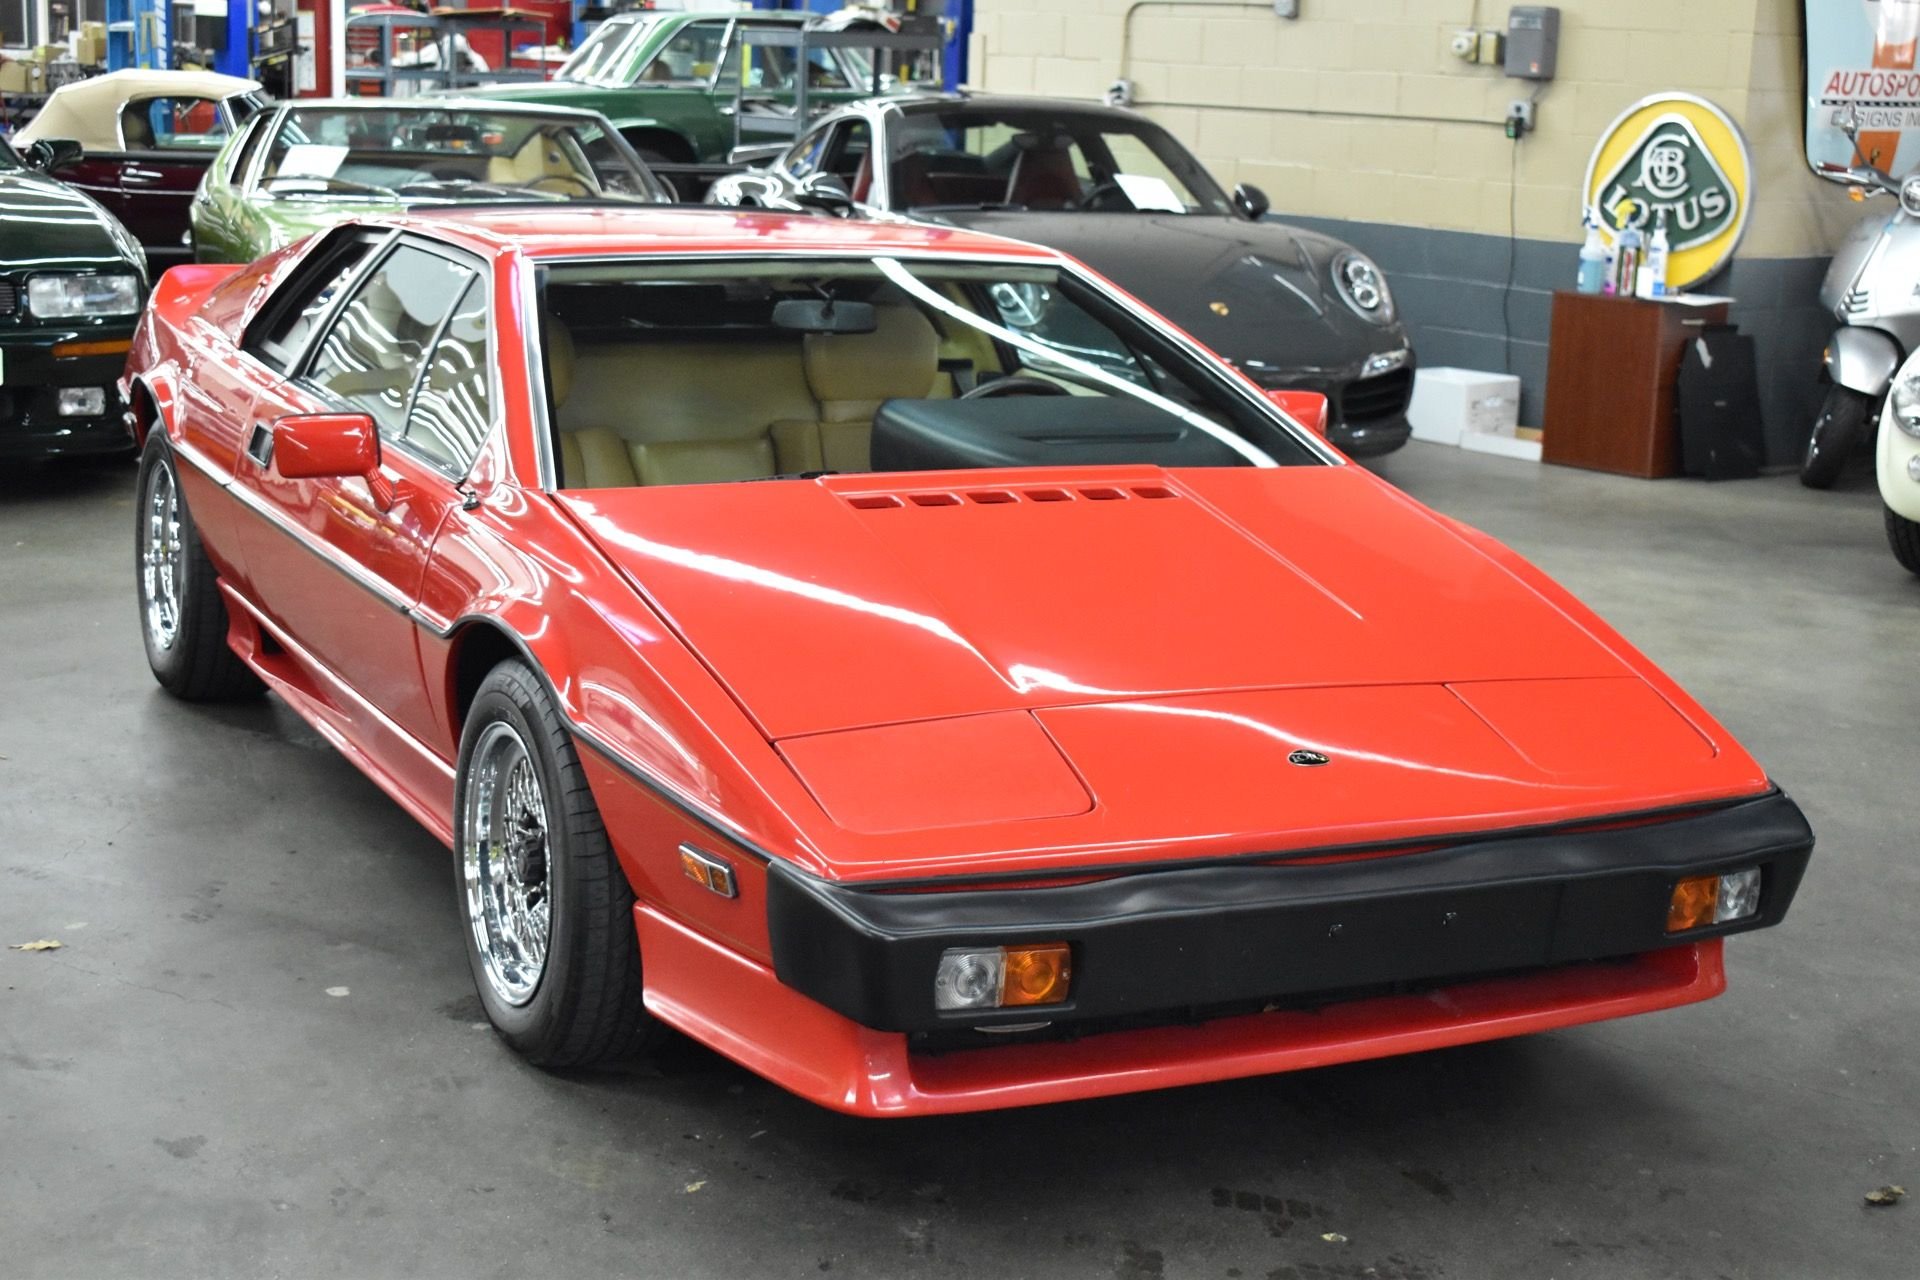 lotus esprit used – Search for your used car on the parking